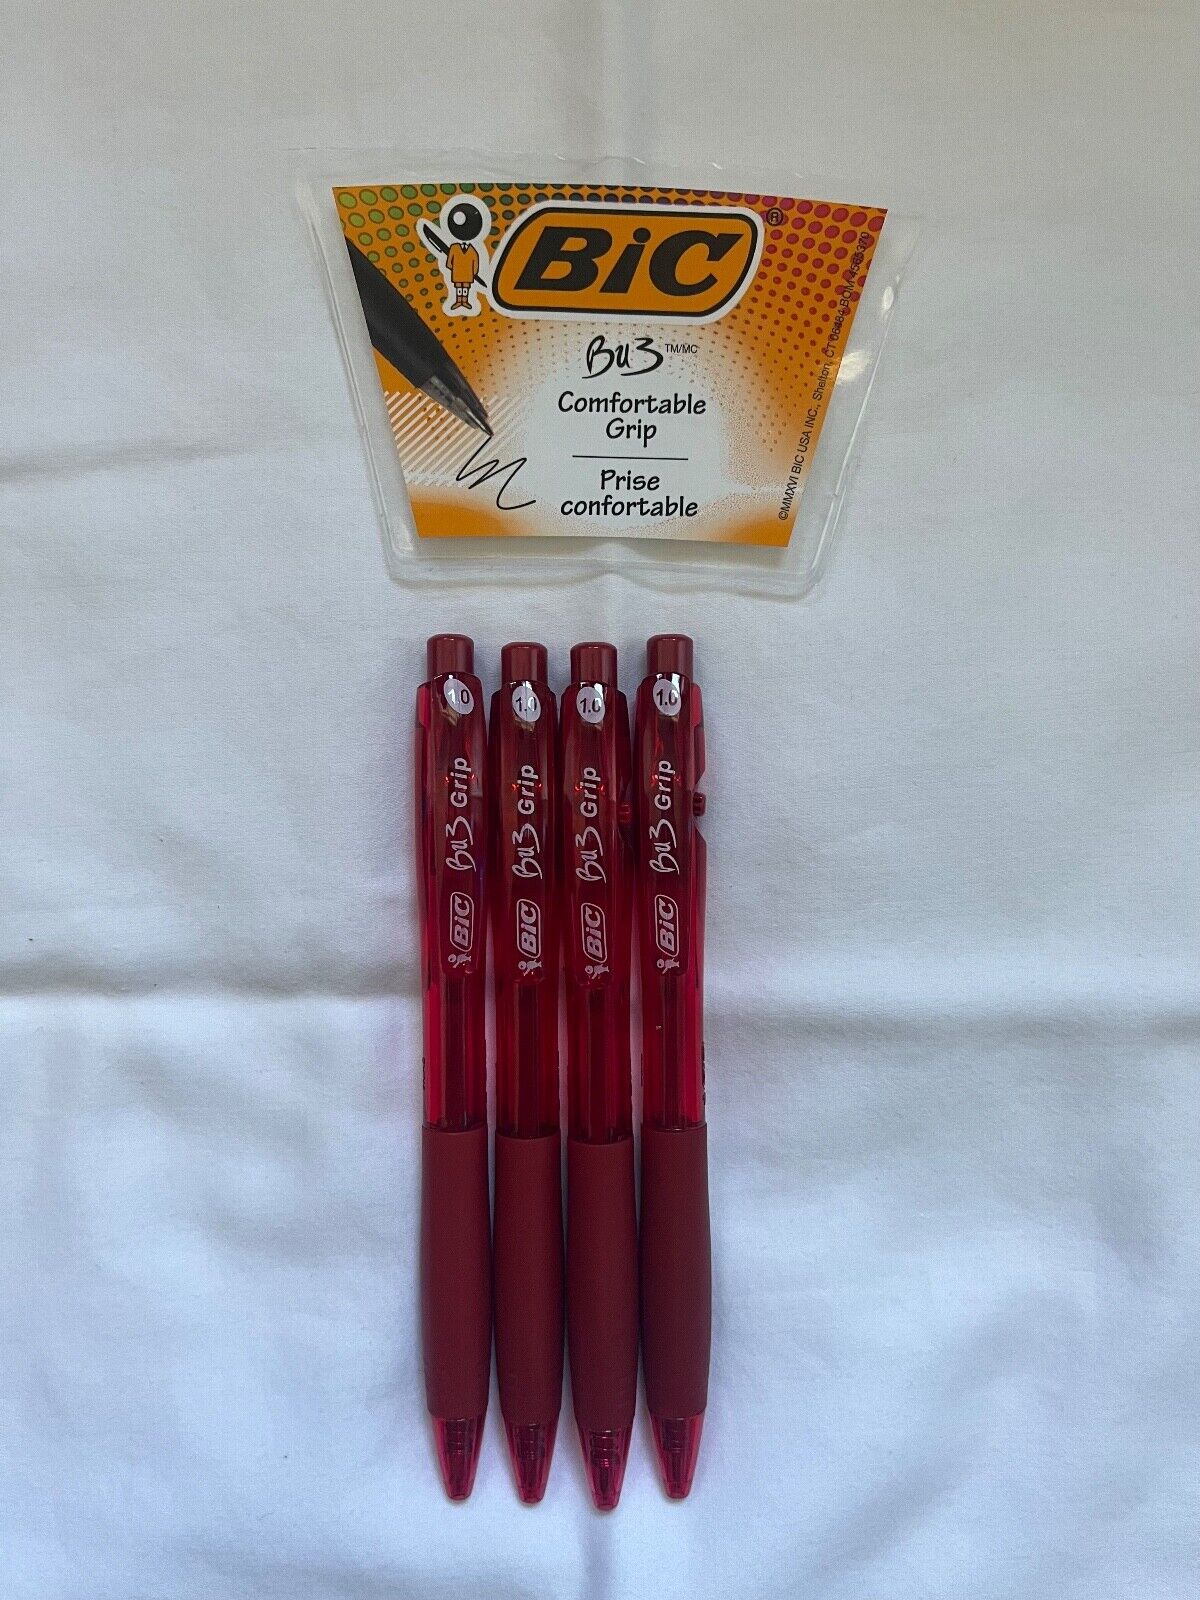 BIC BU3 Retractable Ballpoint Pen (one), Med. Point, Asstd. Ink, You pick color